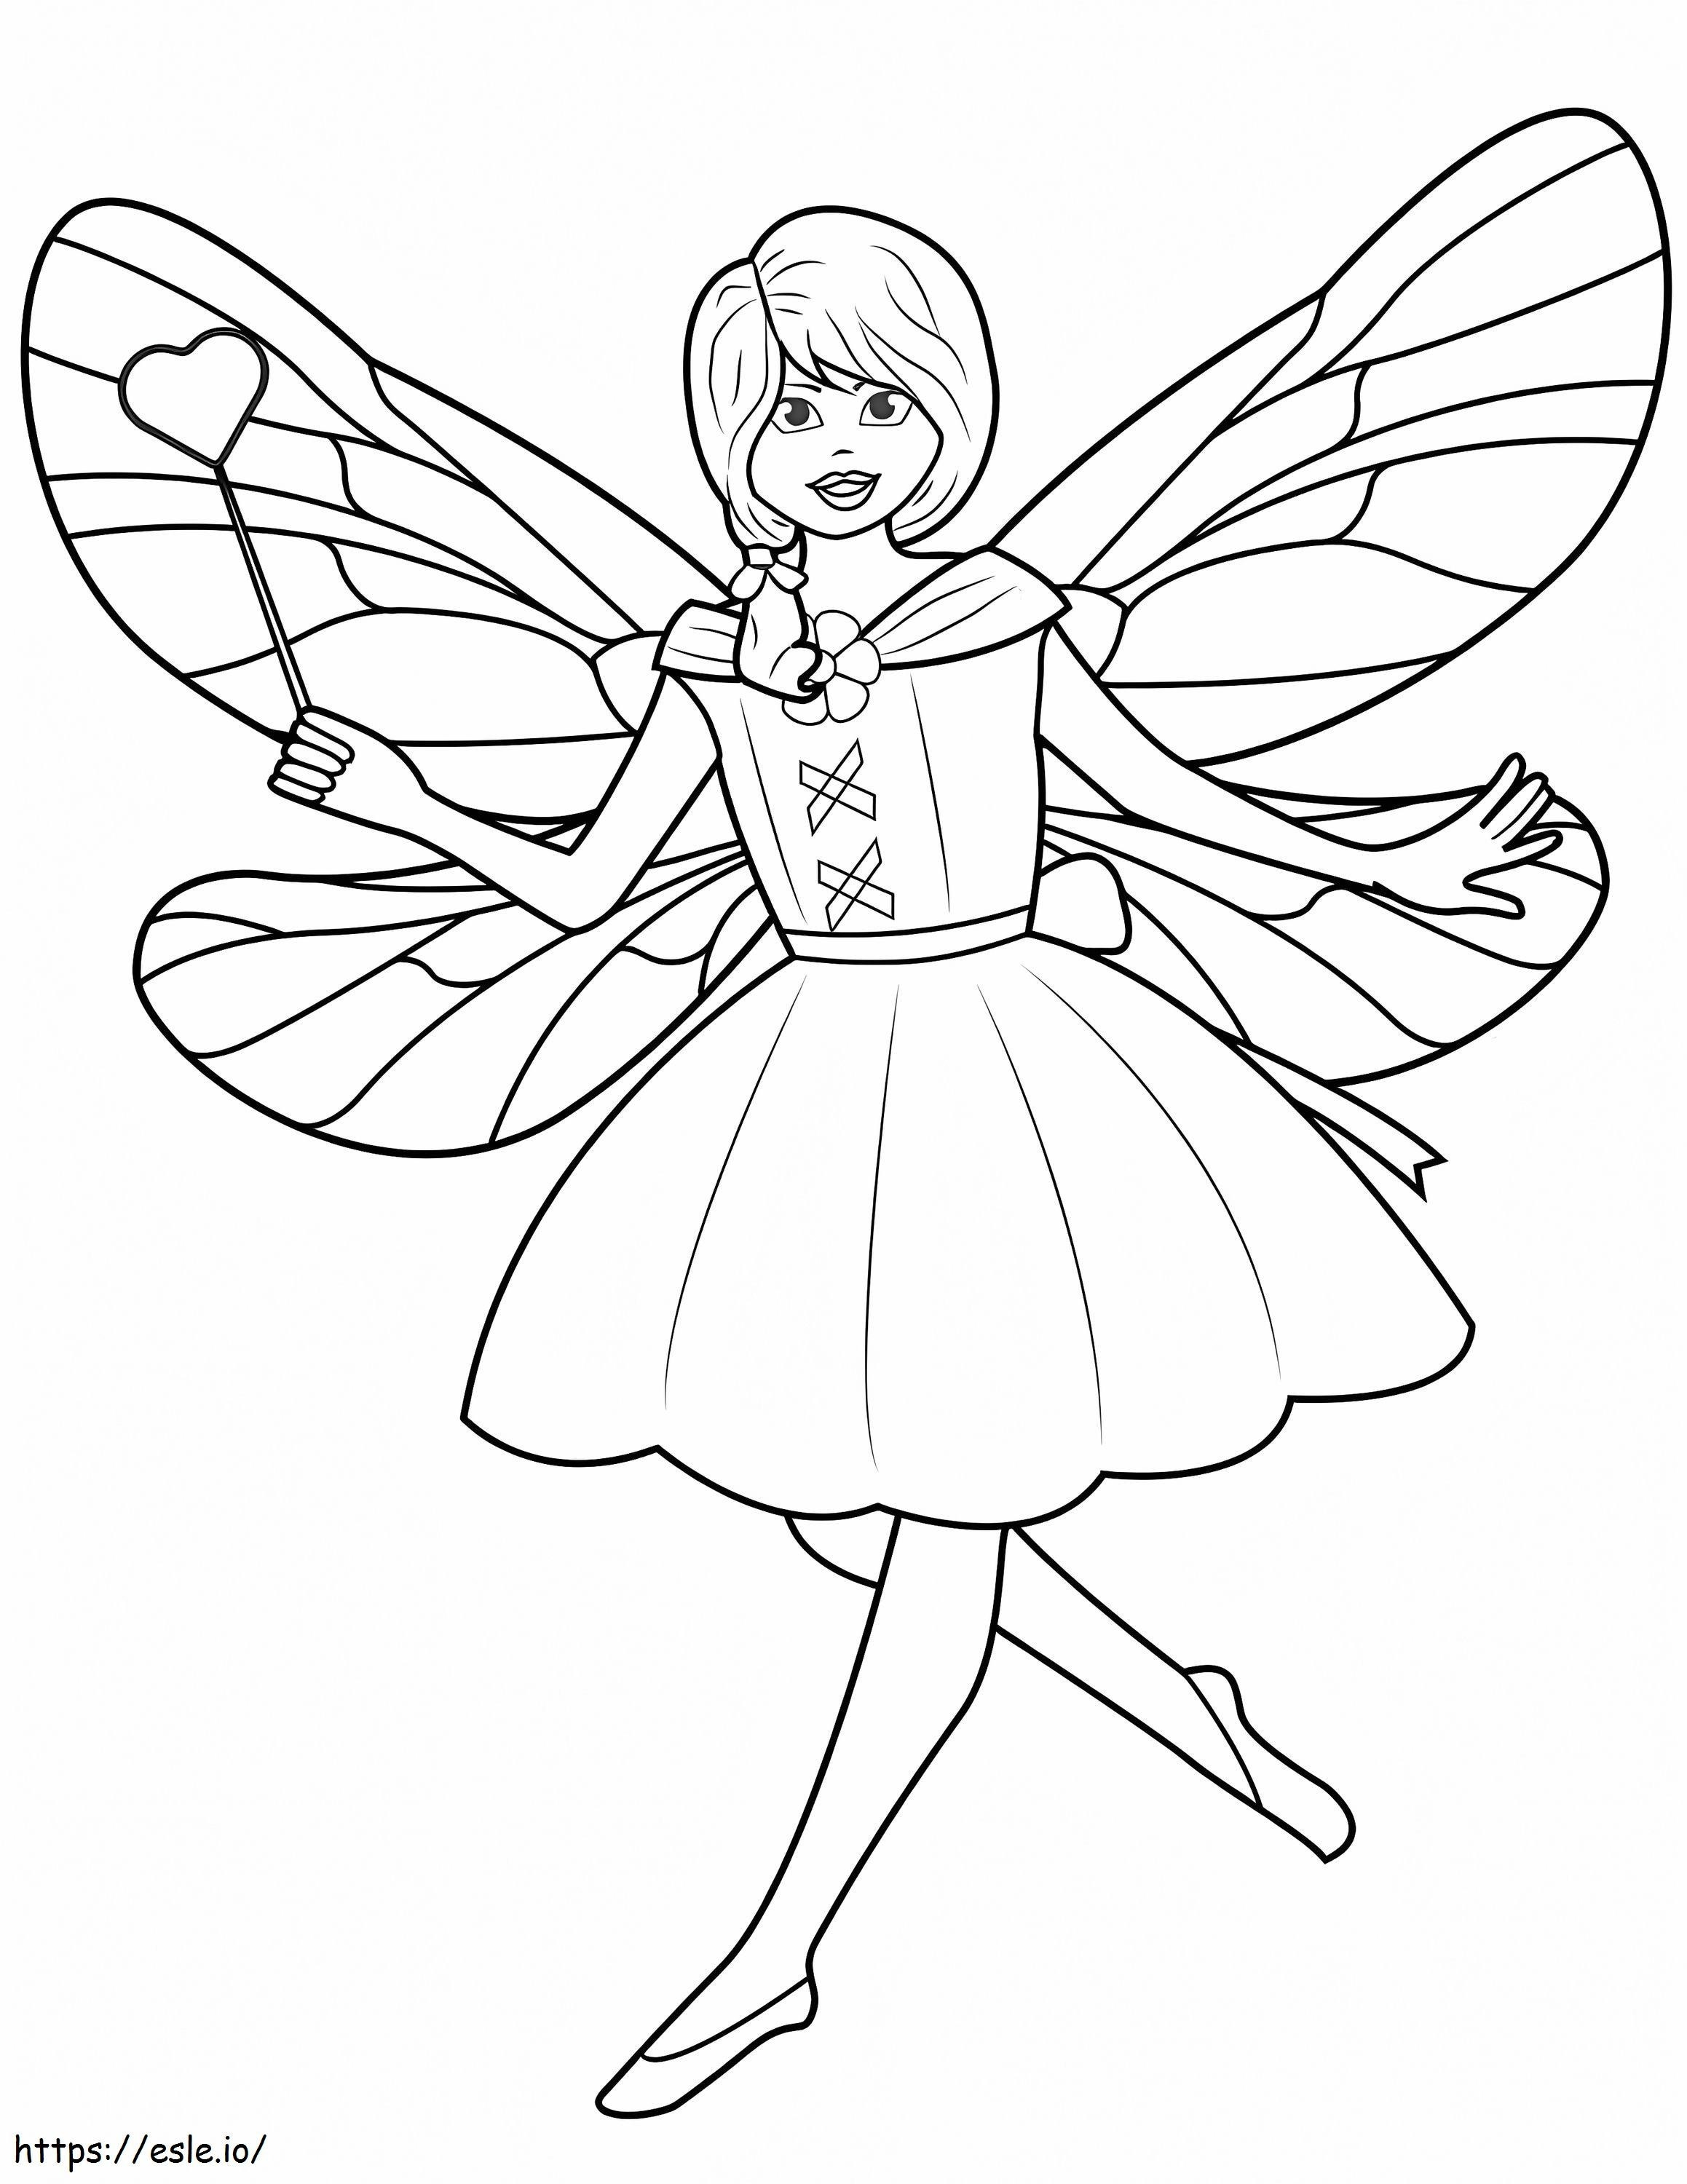 Belle Fee coloring page